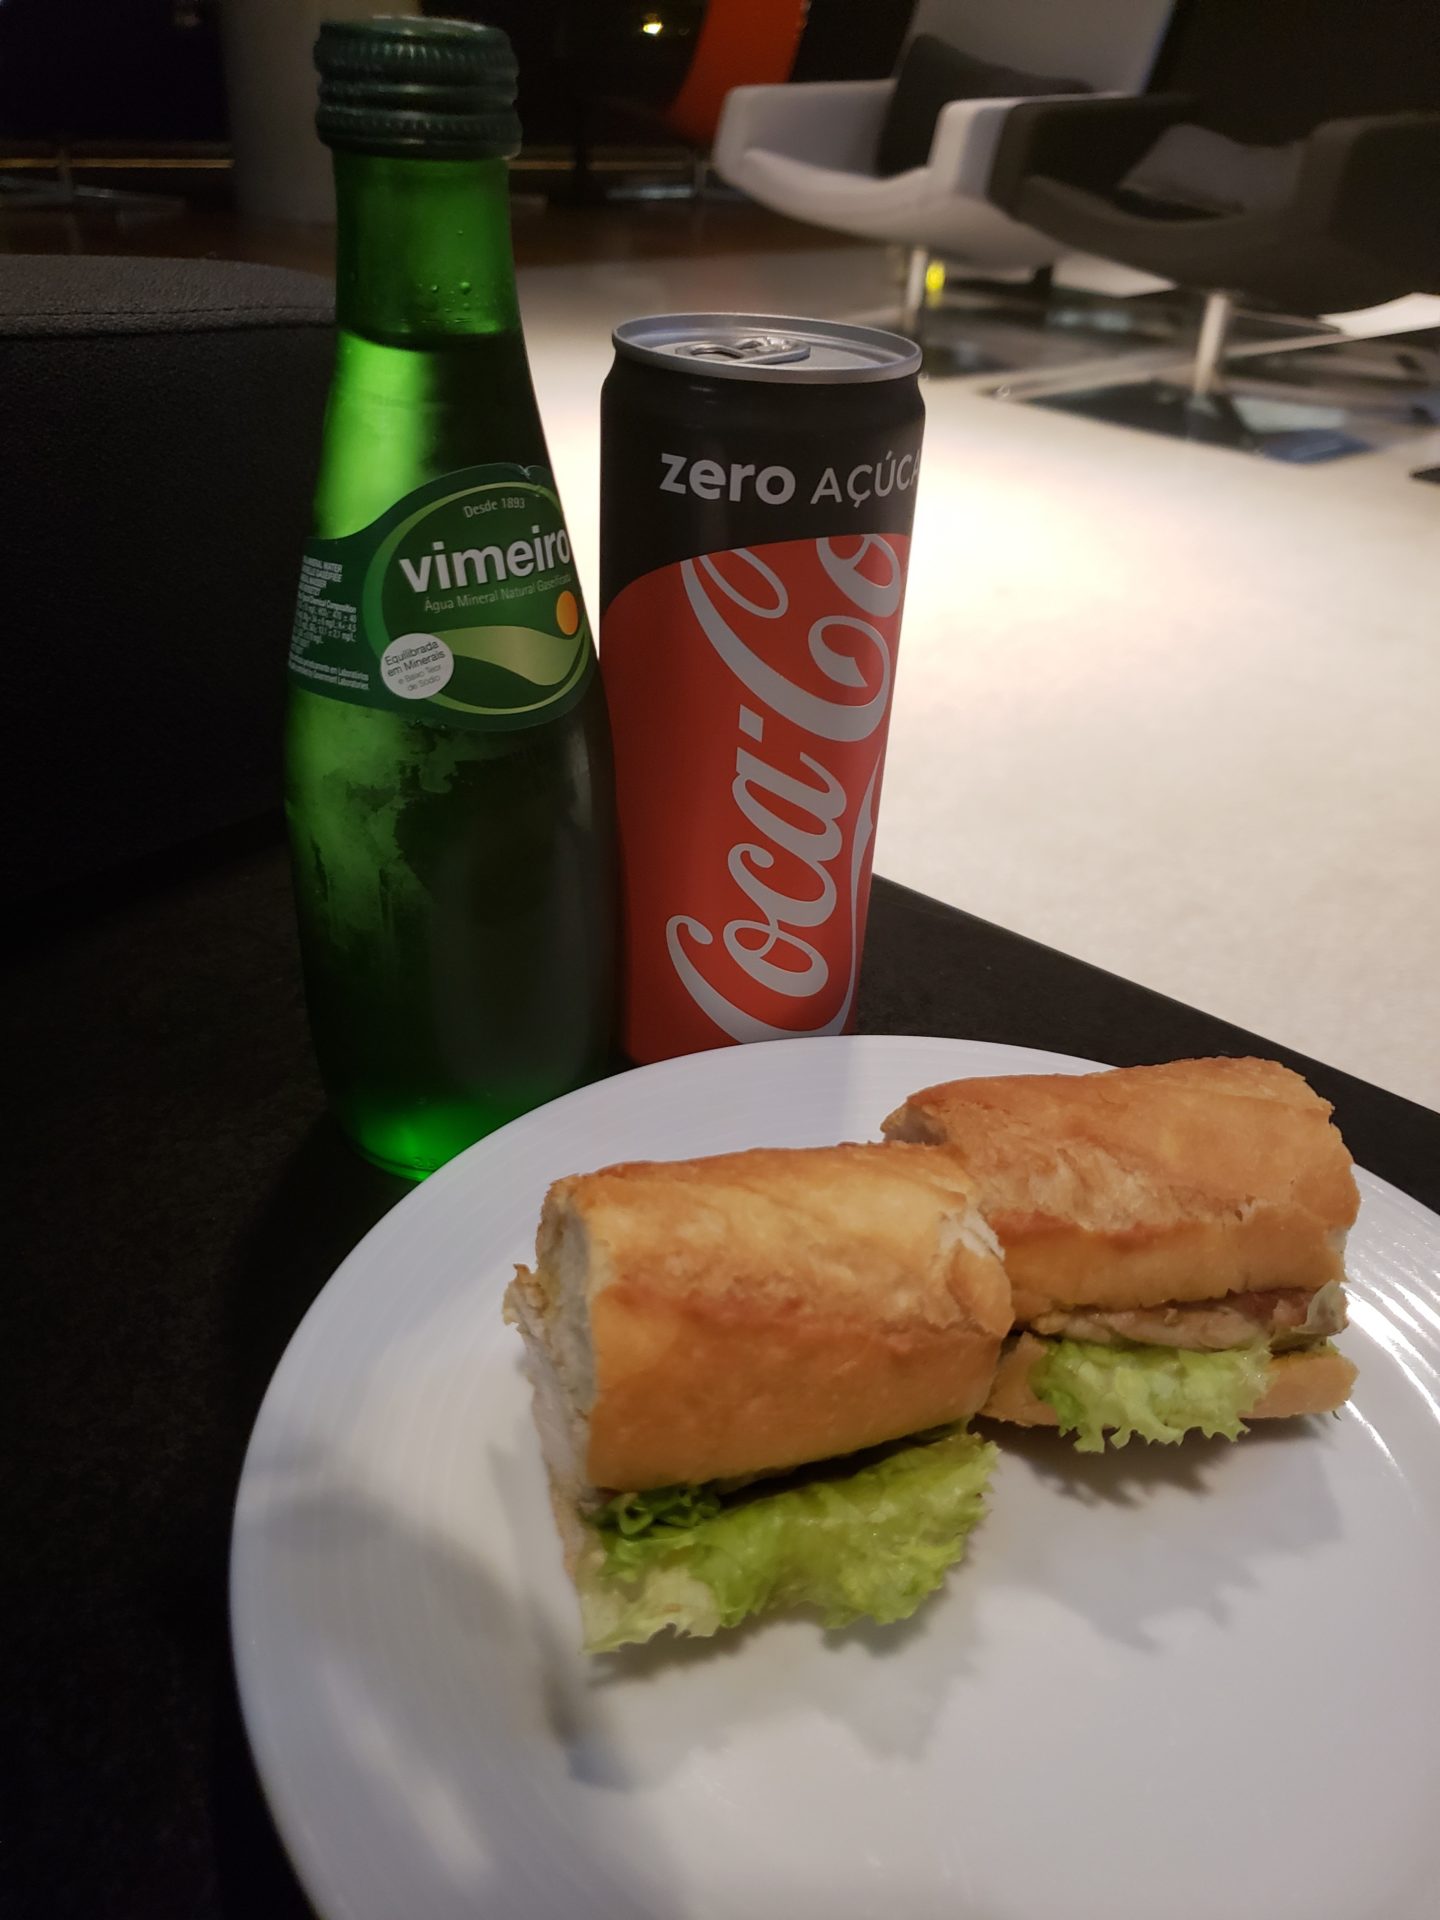 a sandwich on a plate next to a soda and a bottle